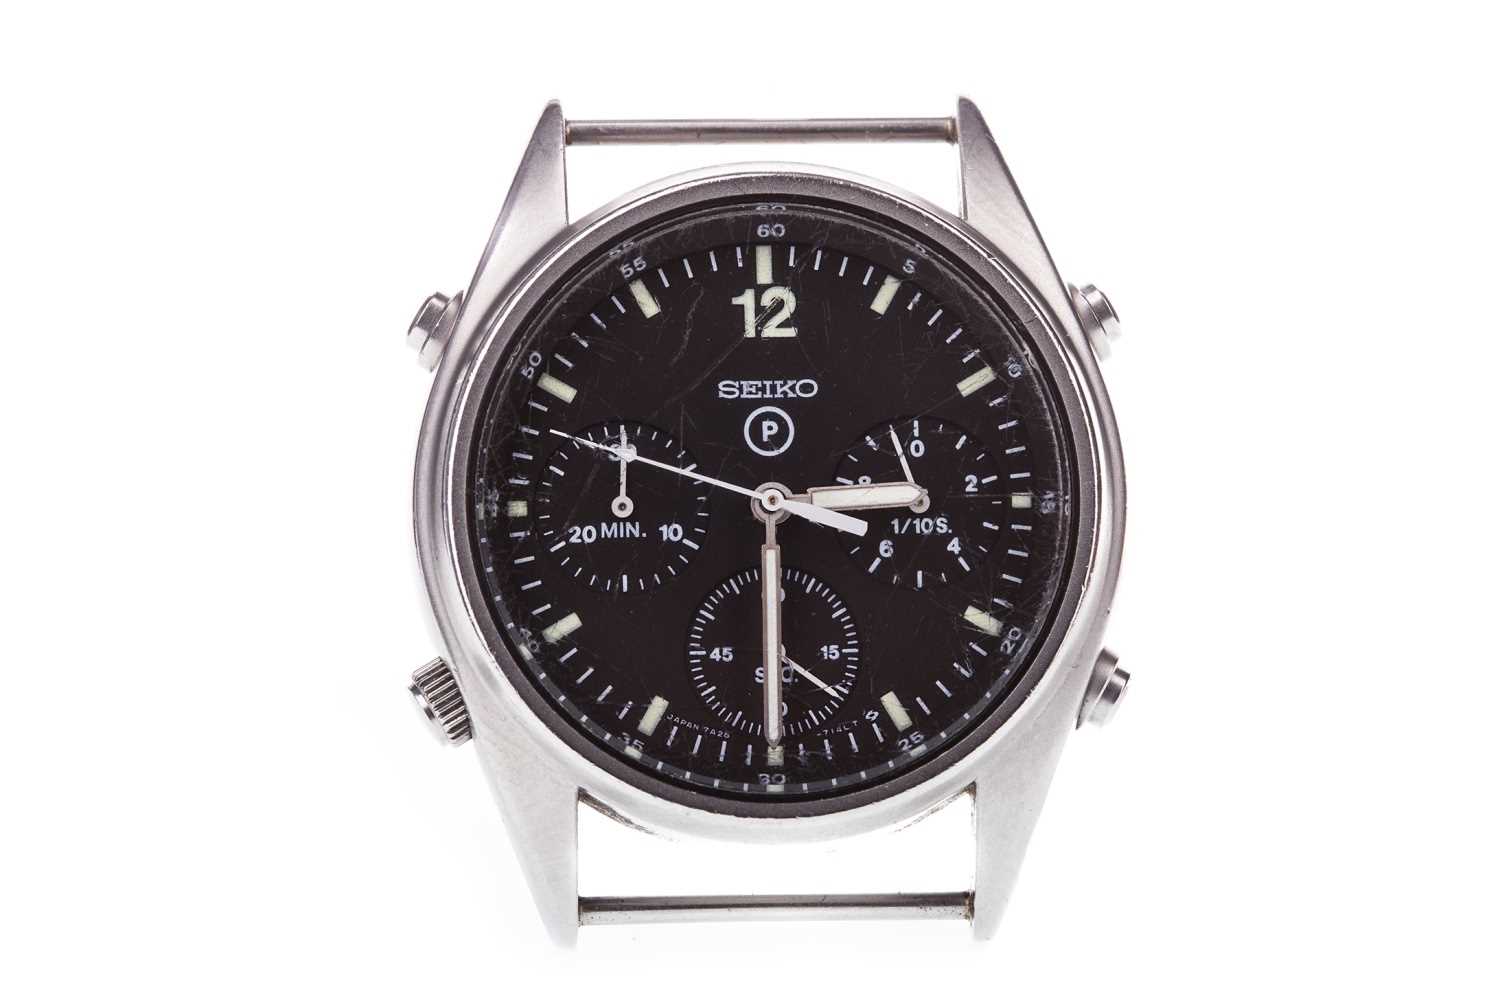 Lot 811 - A GENTLEMAN'S SEIKO MILITARY ISSUE WATCH